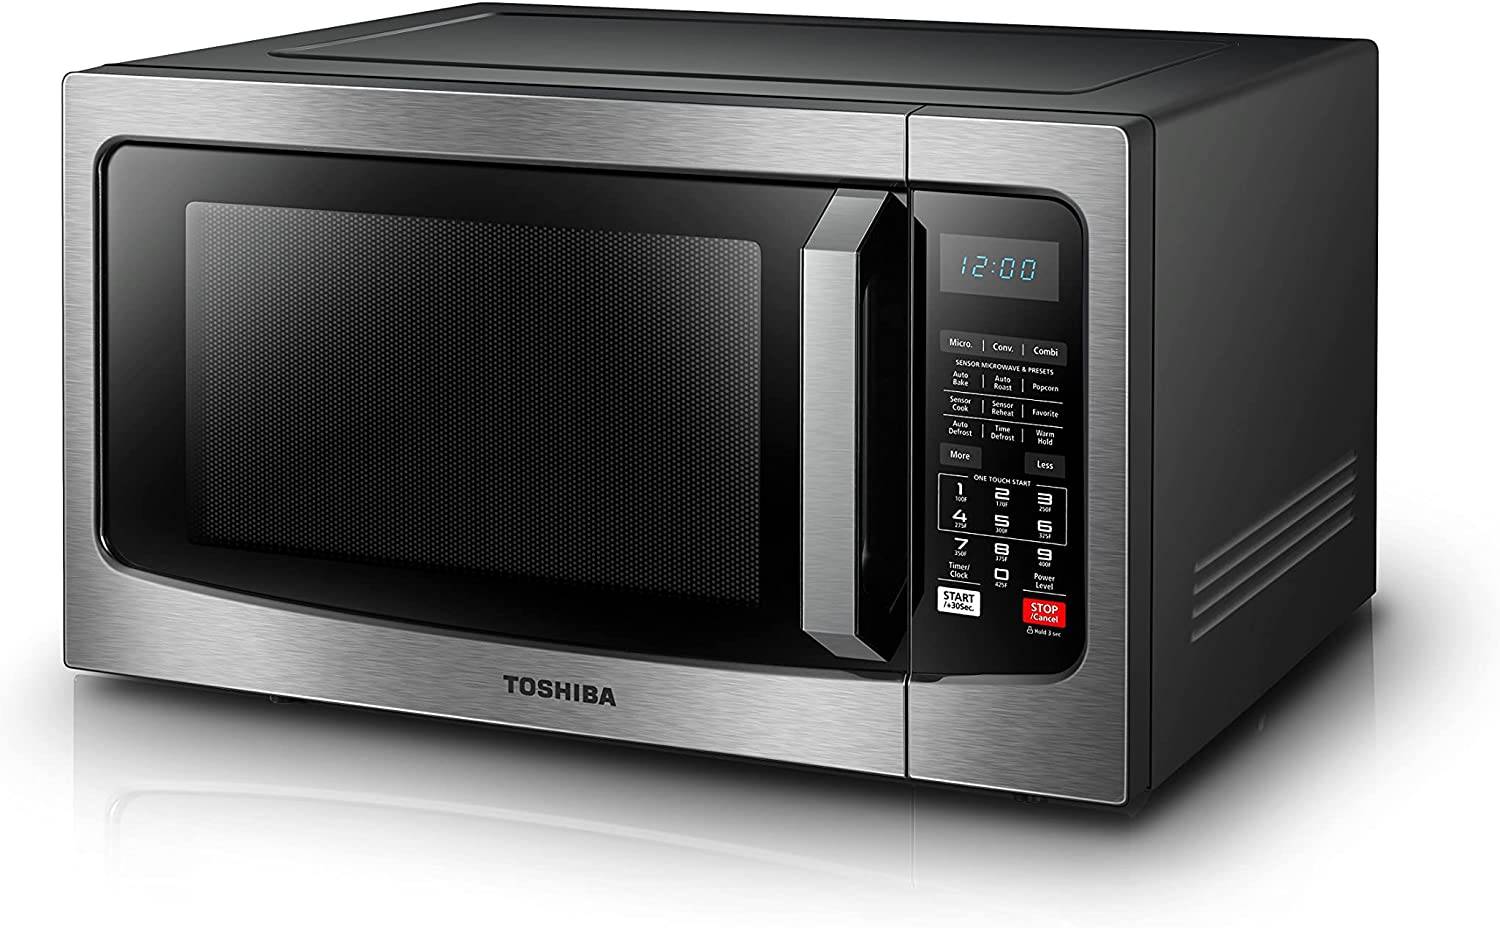 toshiba ec042a5c ss convection microwave oven